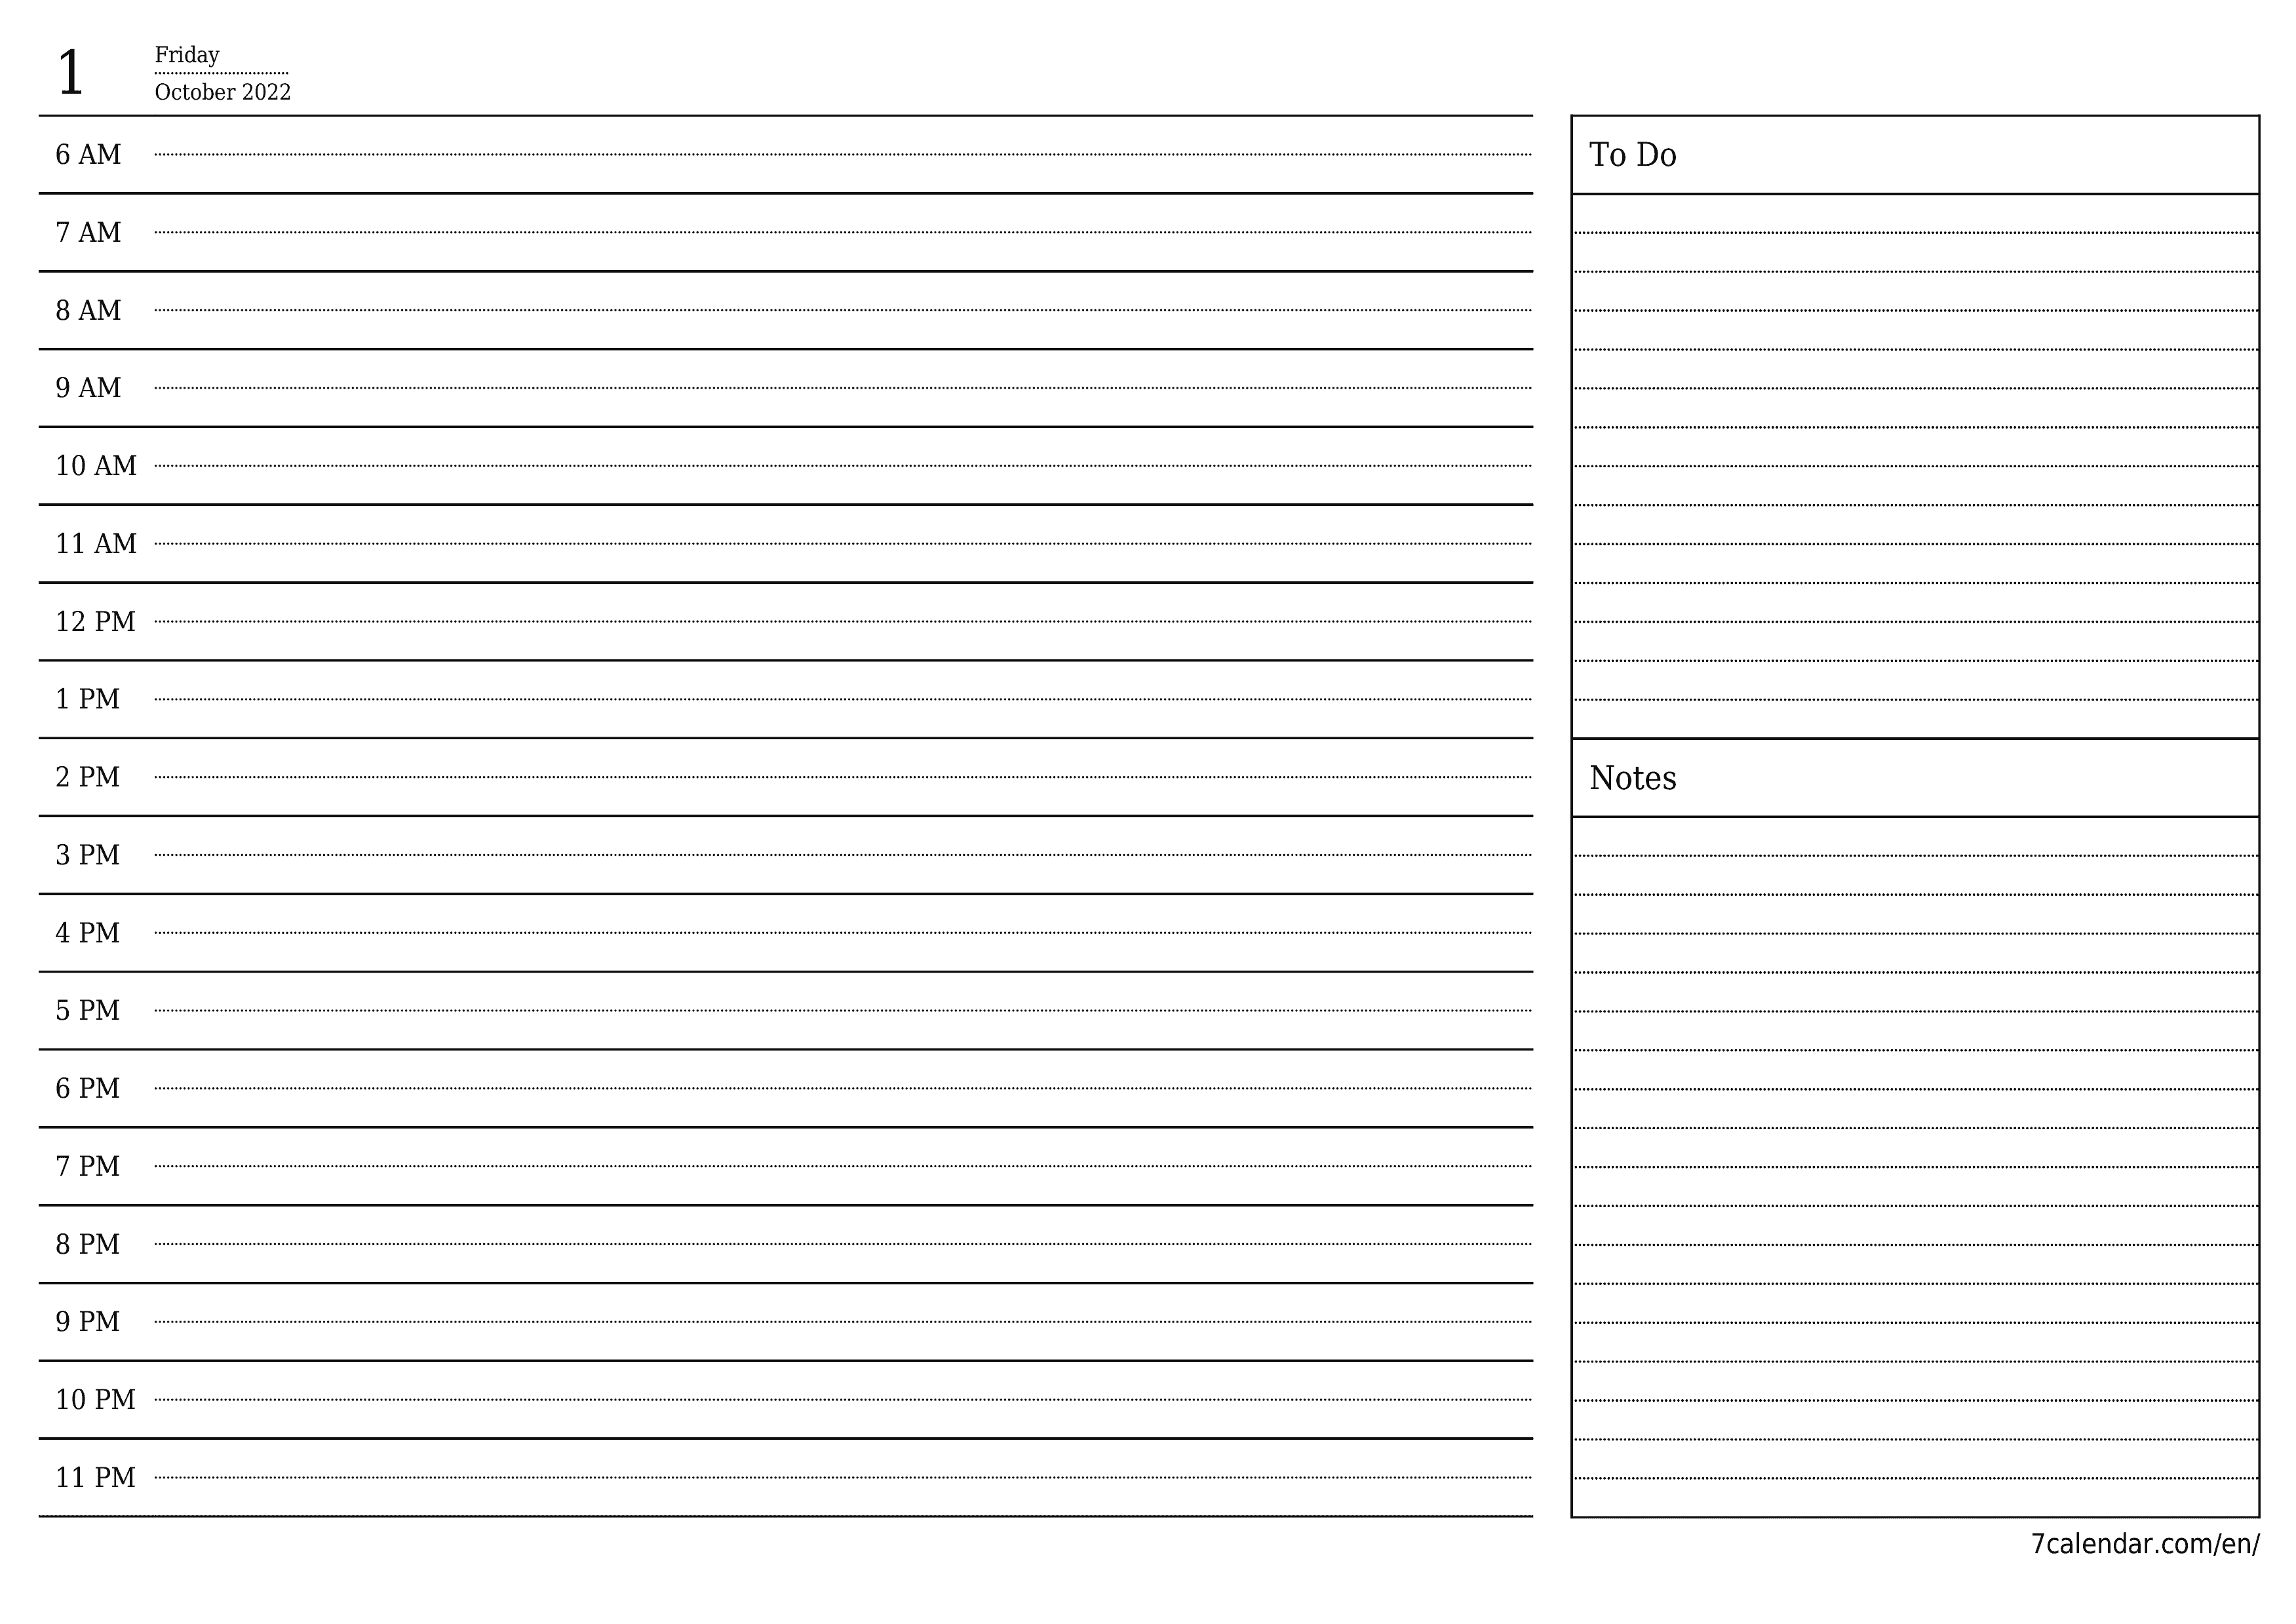 Blank daily calendar planner for day October 2022 with notes, save and print to PDF PNG English - 7calendar.com